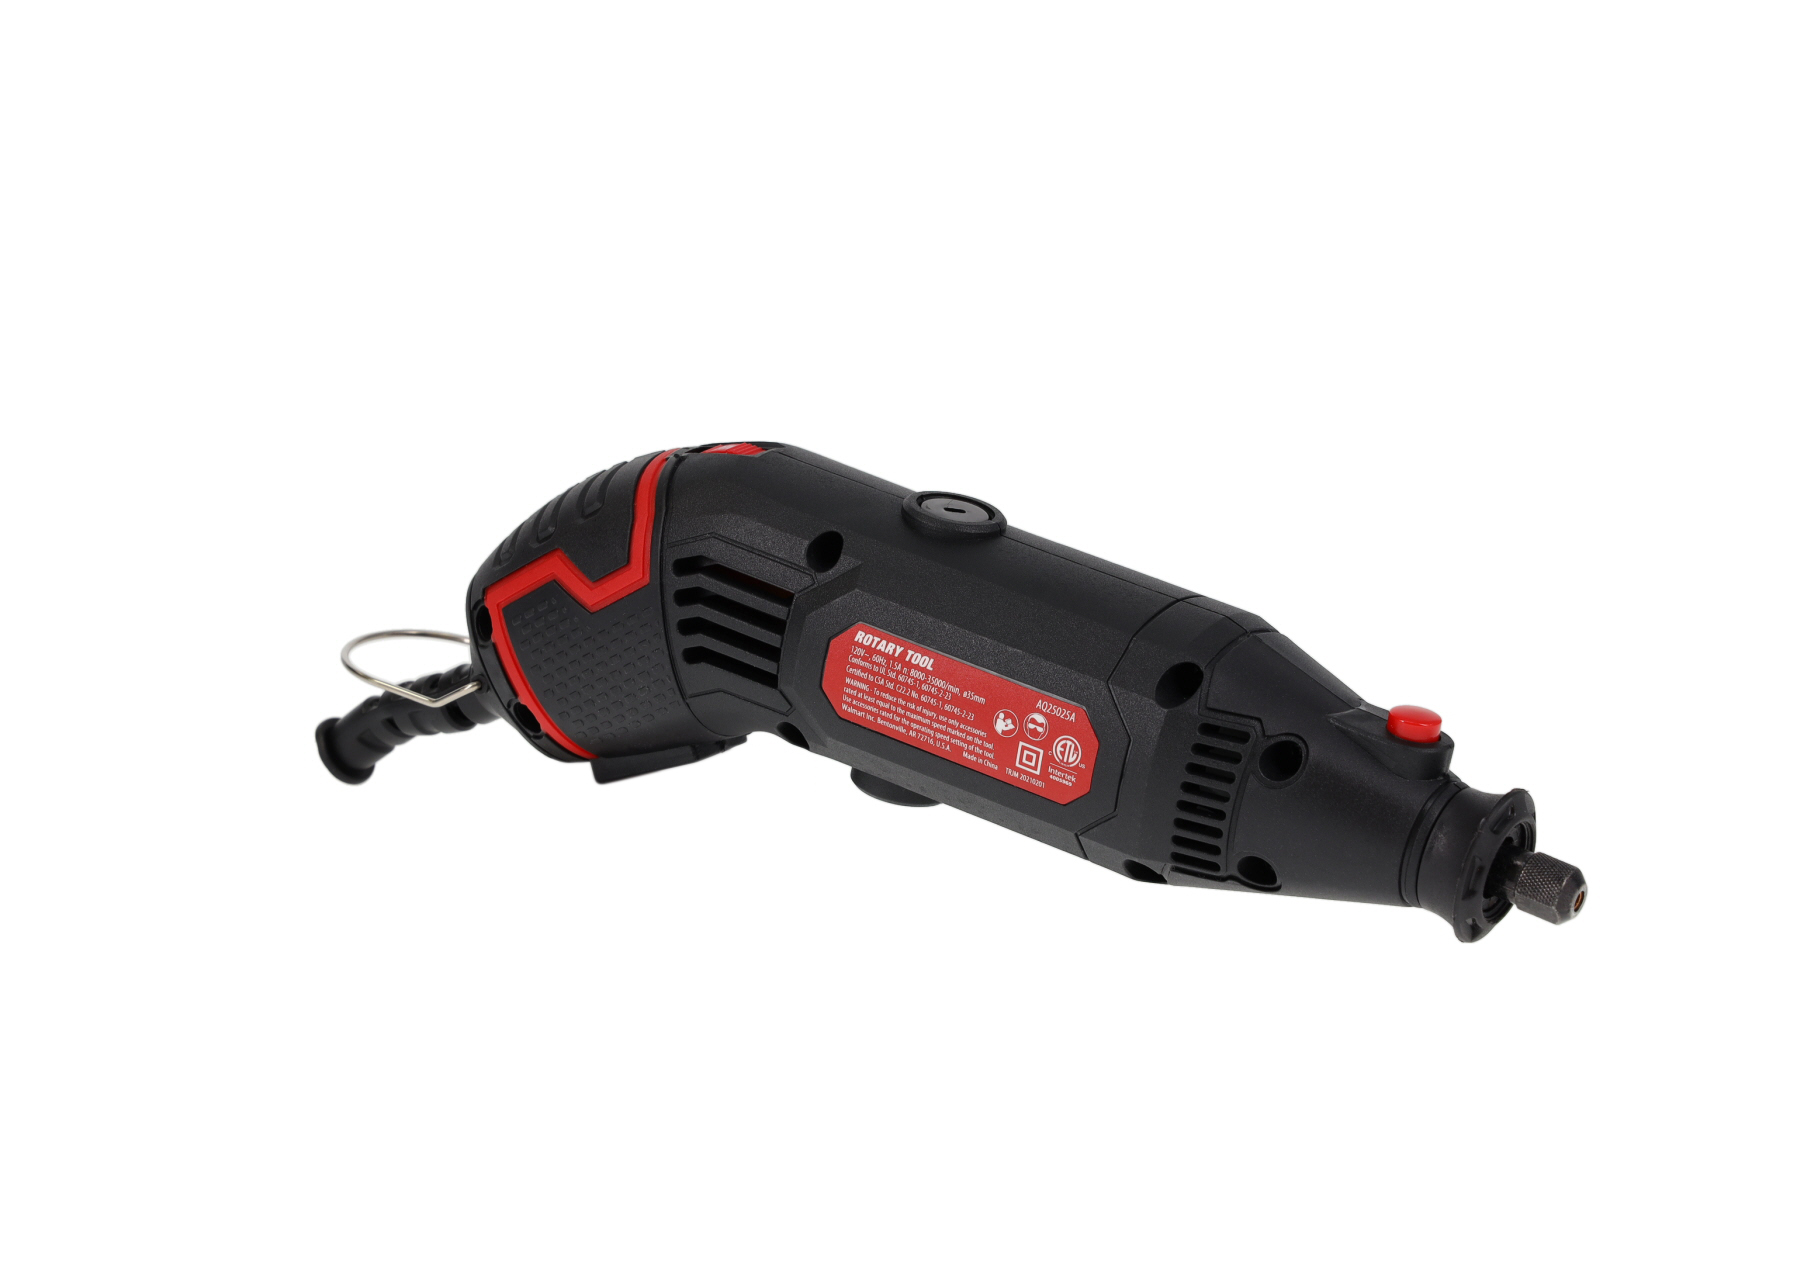 Hyper Tough 1.5 Amp Corded Rotary Tool, Variable Speed with 105 Rotary  Accessories & Storage Case, 120 Volts 